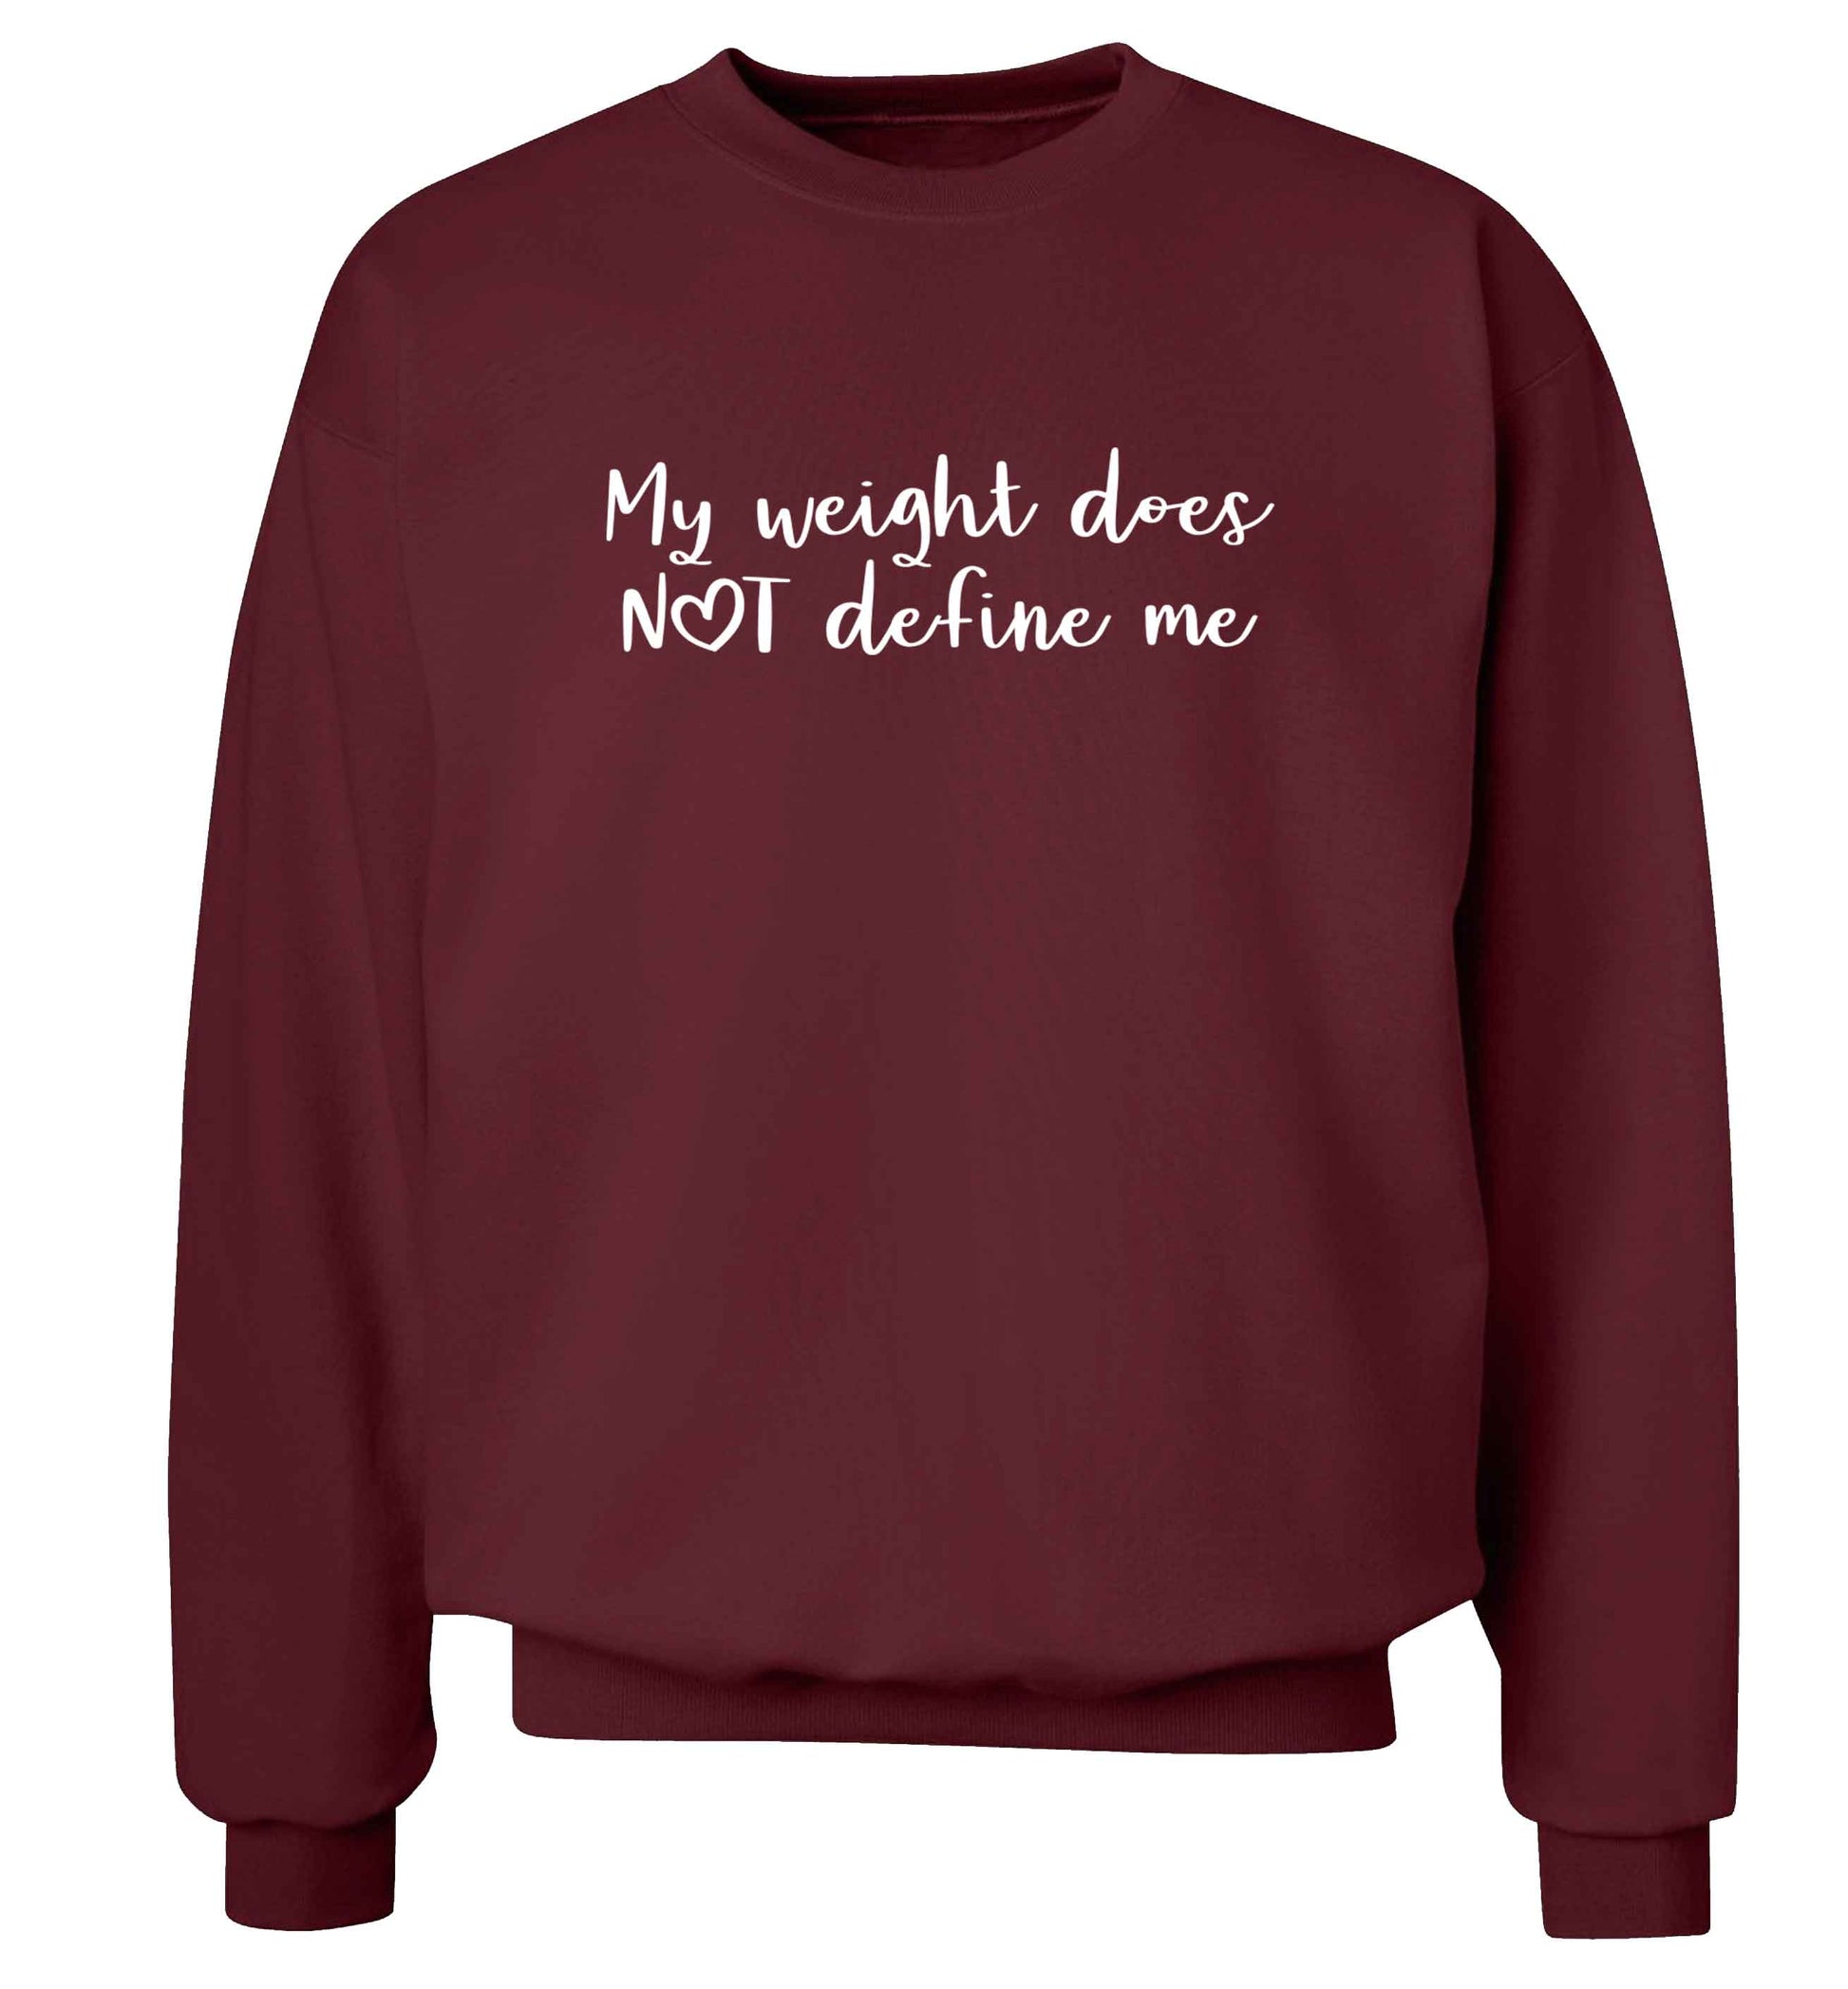 My weight does not define me adult's unisex maroon sweater 2XL